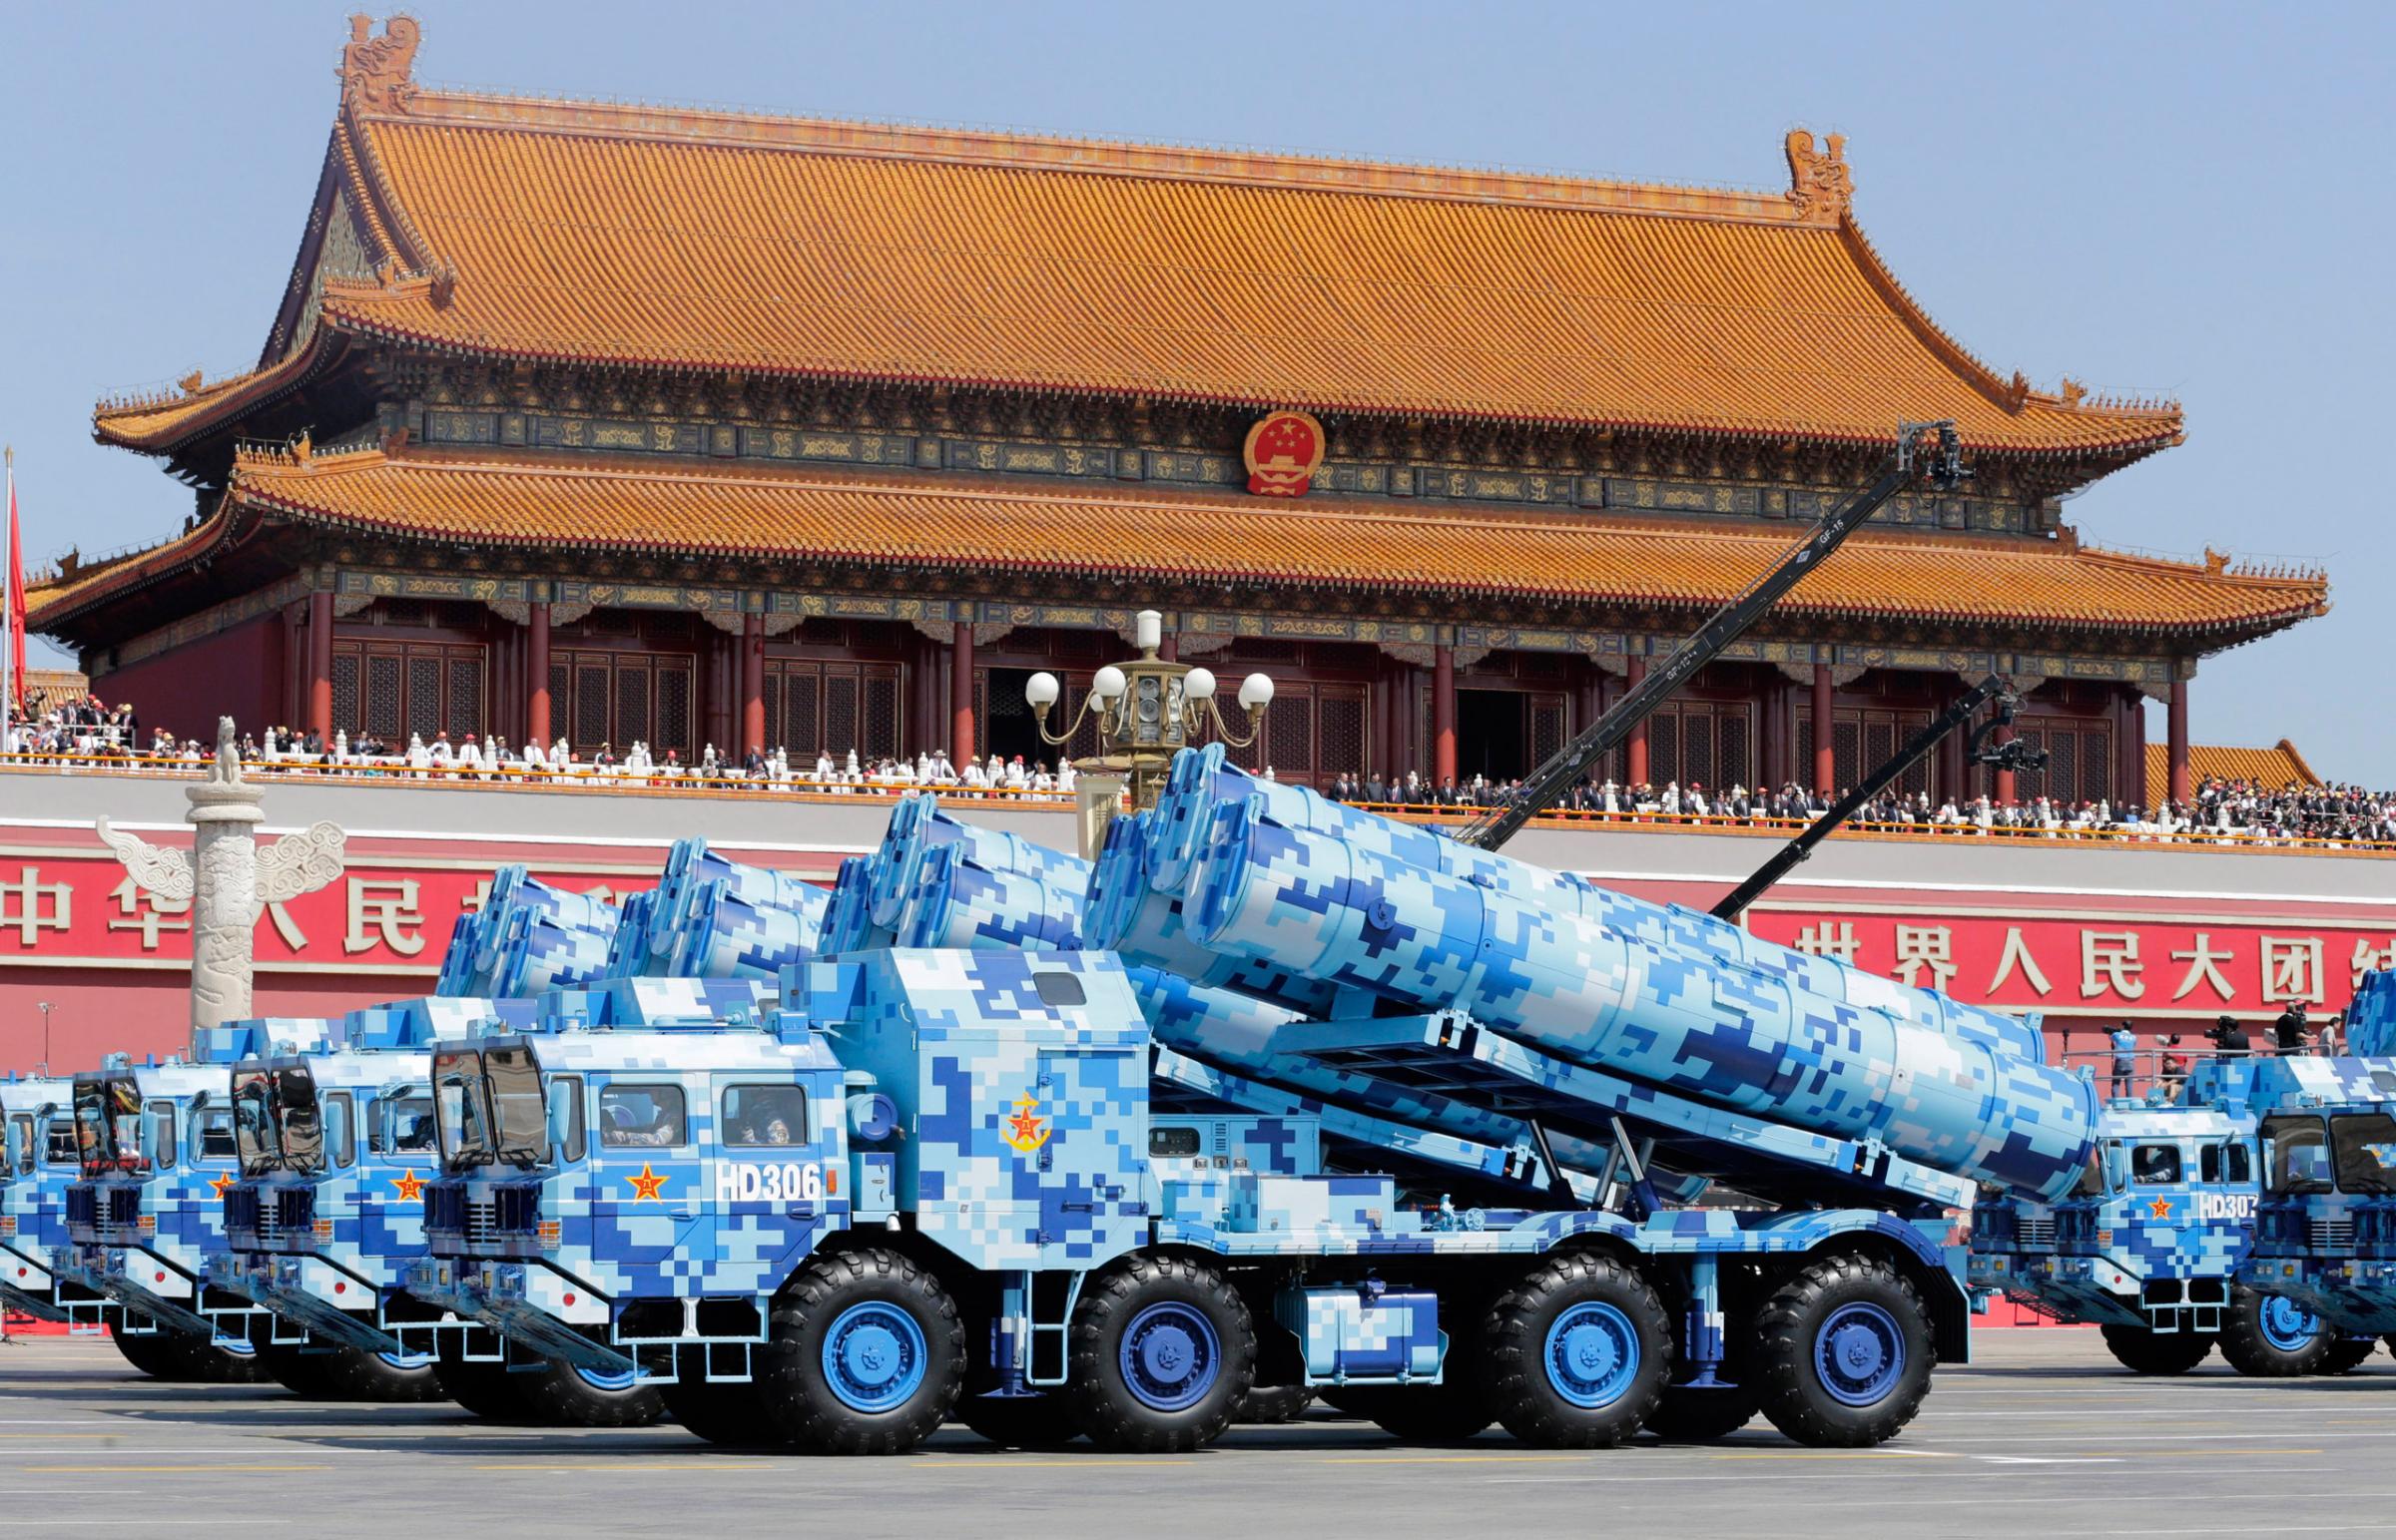 BEIJING, CHINA - SEPTEMBER 03: Military vehicles carrying shore-to-ship missiles drive past the Tiananmen Gate during a military parade to mark the 70th anniversary of the end of World War Two on September 3, 2015 in Beijing, China. China is marking the 70th anniversary of the end of World War II and its role in defeating Japan with a new national holiday and a military parade in Beijing. (Photo by Jason Lee - Pool/Getty Images)